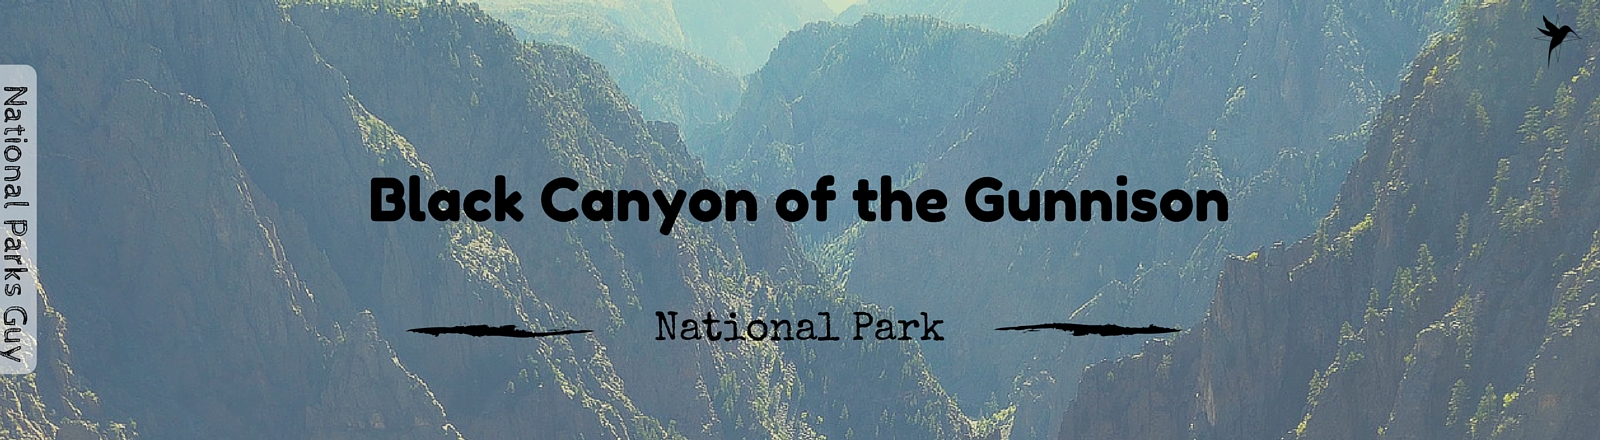 Black Canyon of the Gunnison National Park, USA, National Parks Guy, Stories, Tales, Adventures, Wildlife